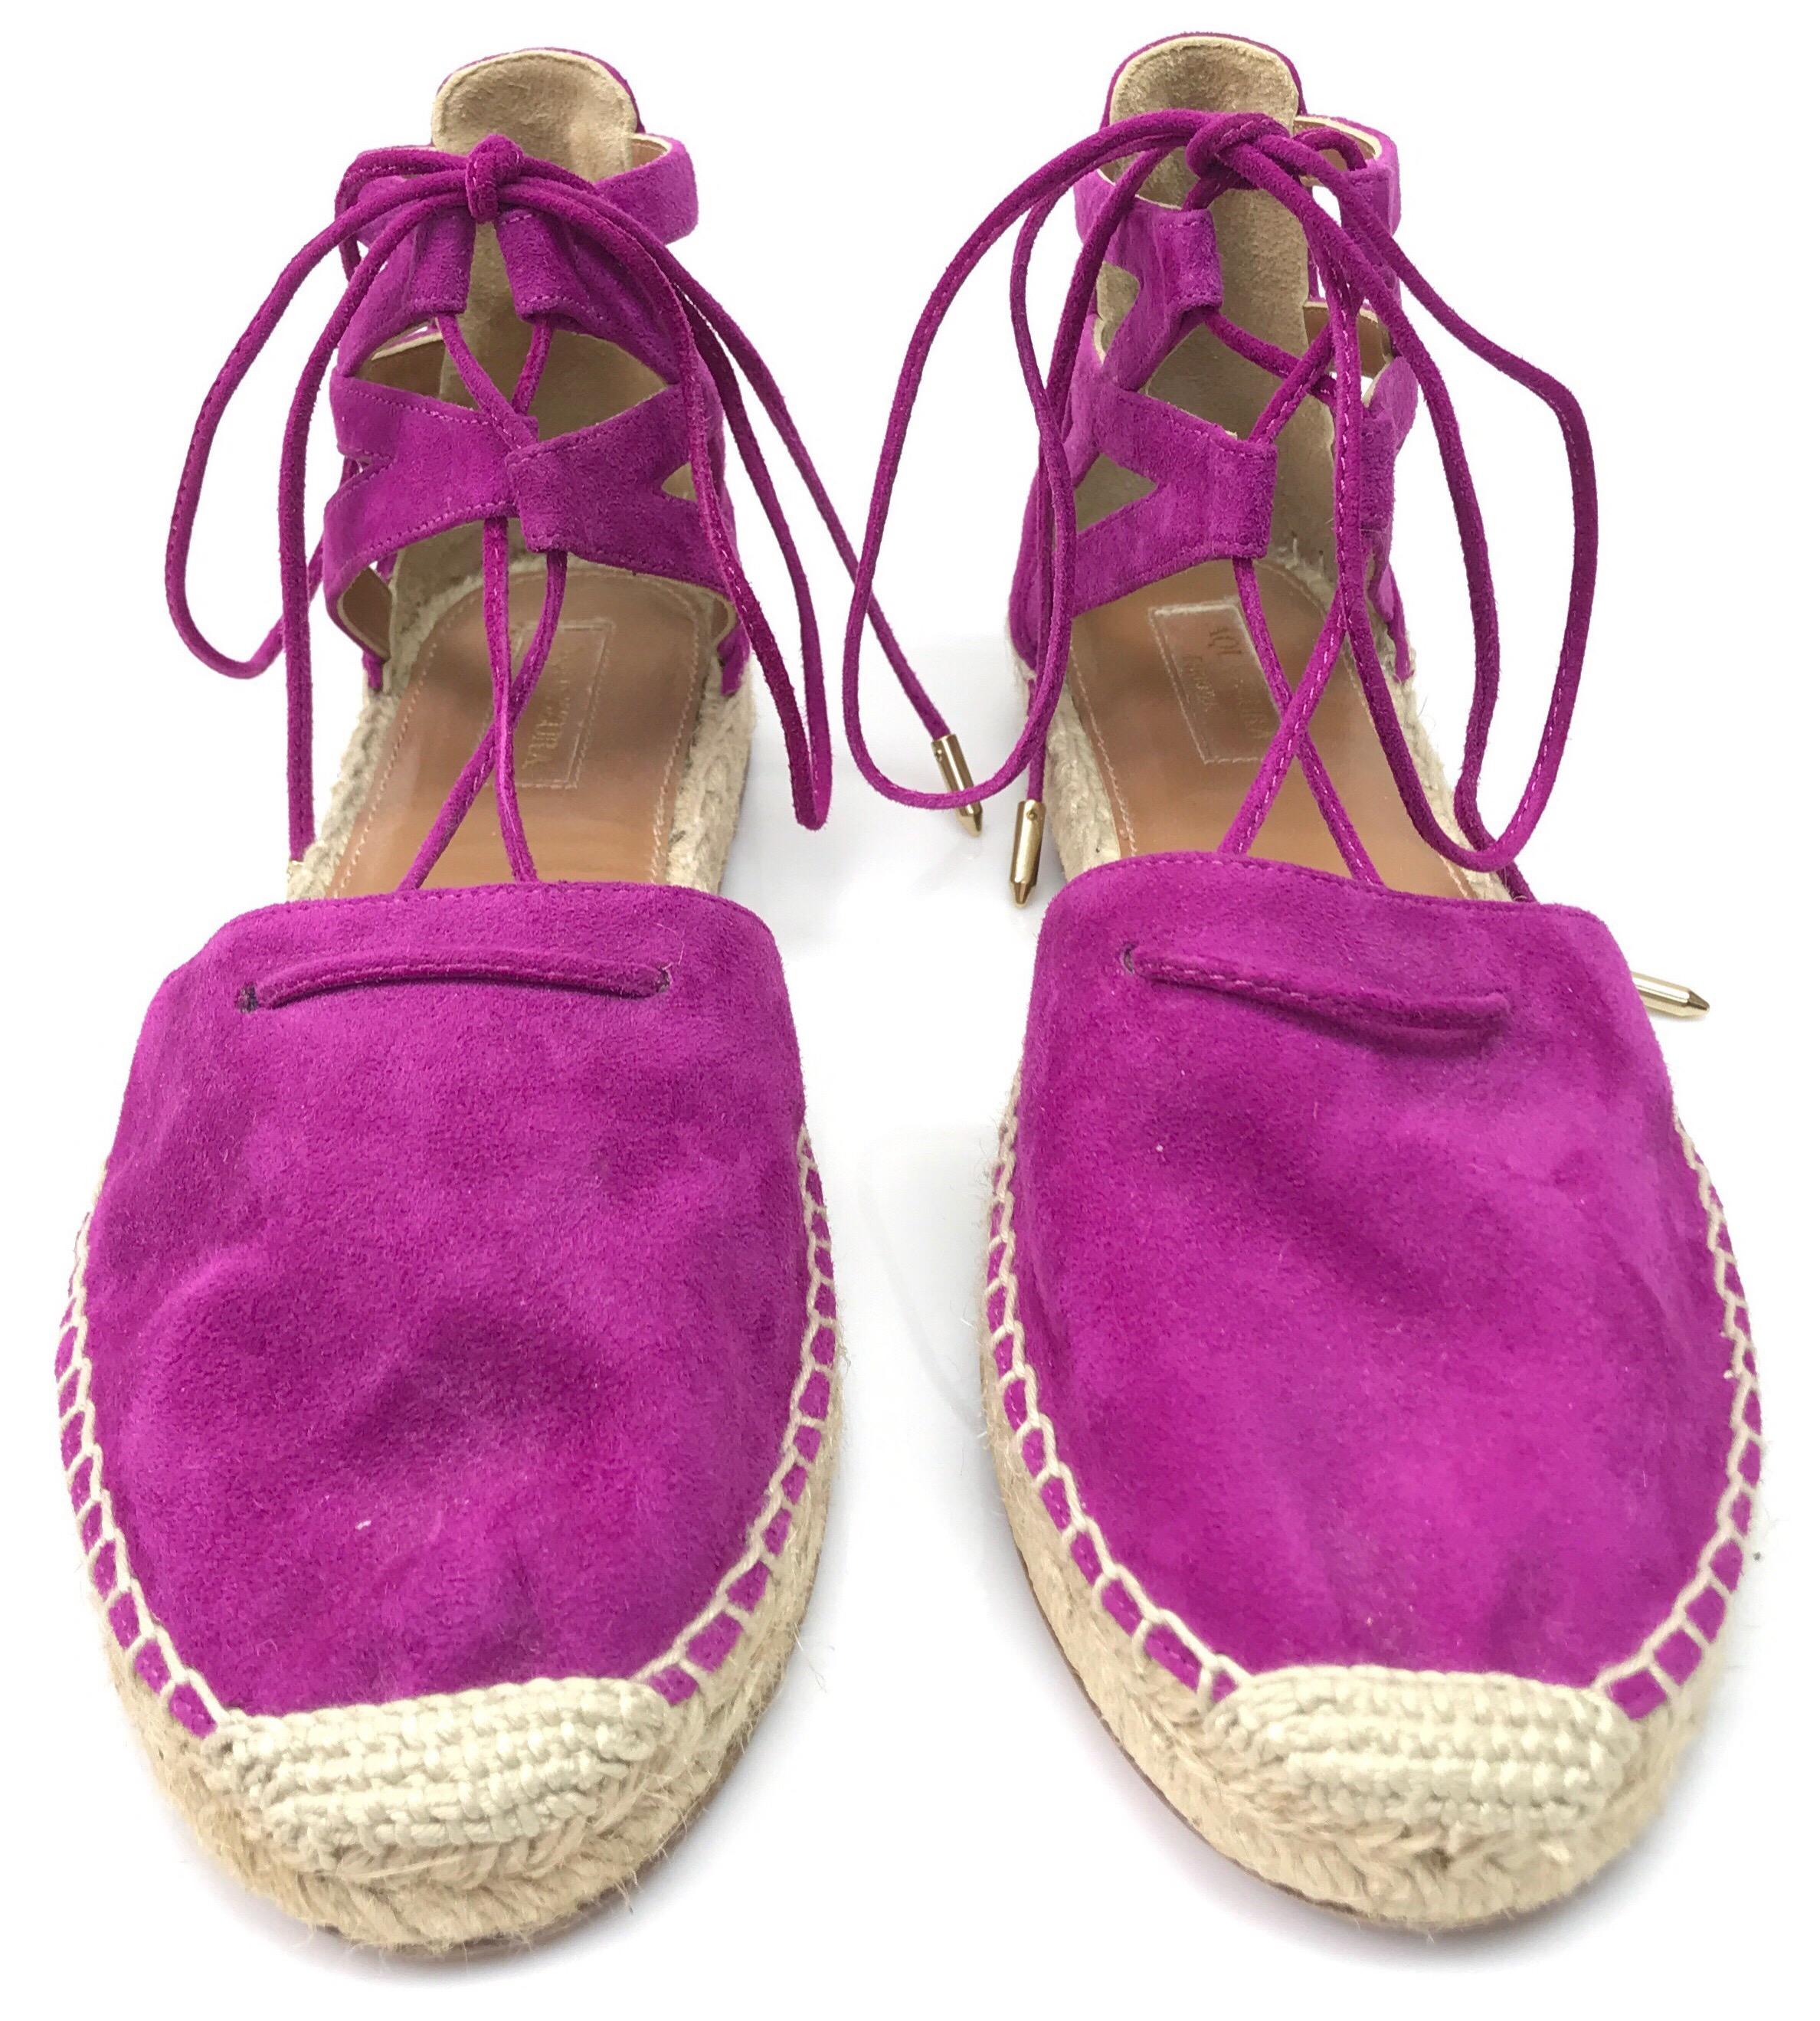 Aquazzura Fuchsia Espadrilles-38. These adorable Aquazzura espadrilles are in great condition. They only show sign of use on the bottom with some of the surface rubbed away. They are made of a fuchsia suede material and have fuchsia suede laces with